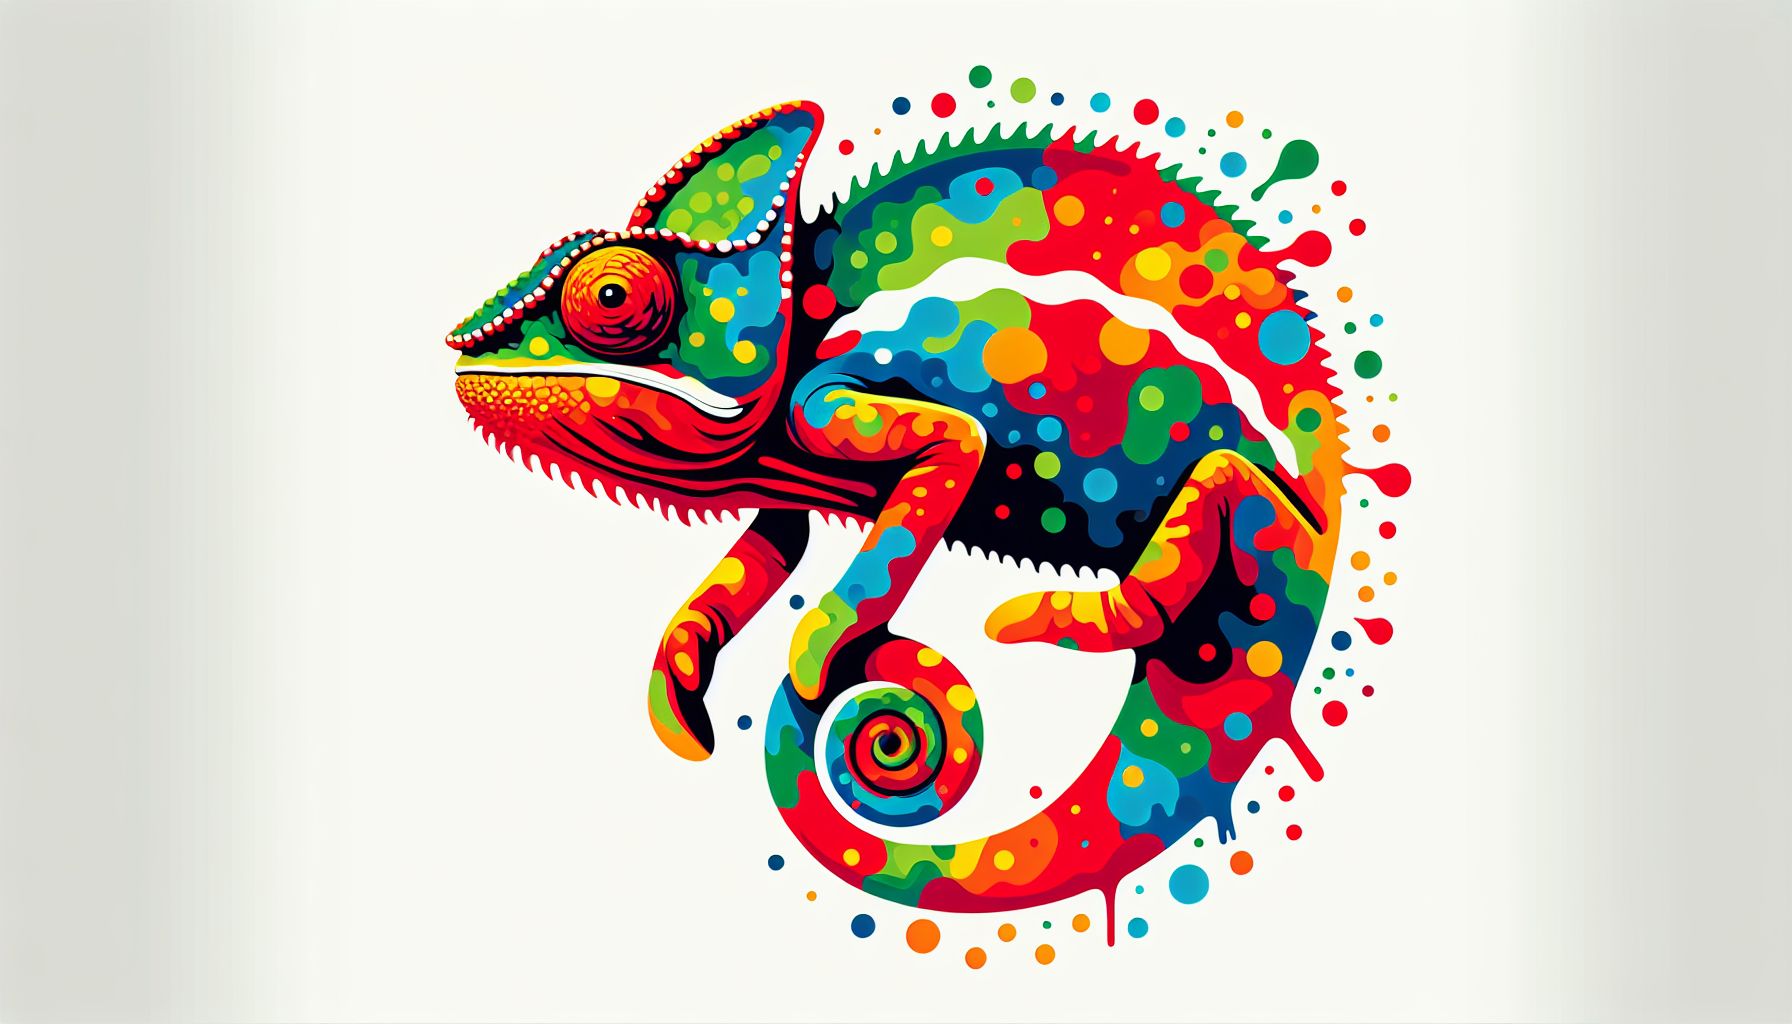 Chameleon in flat illustration style and white background, red #f47574, green #88c7a8, yellow #fcc44b, and blue #645bc8 colors.